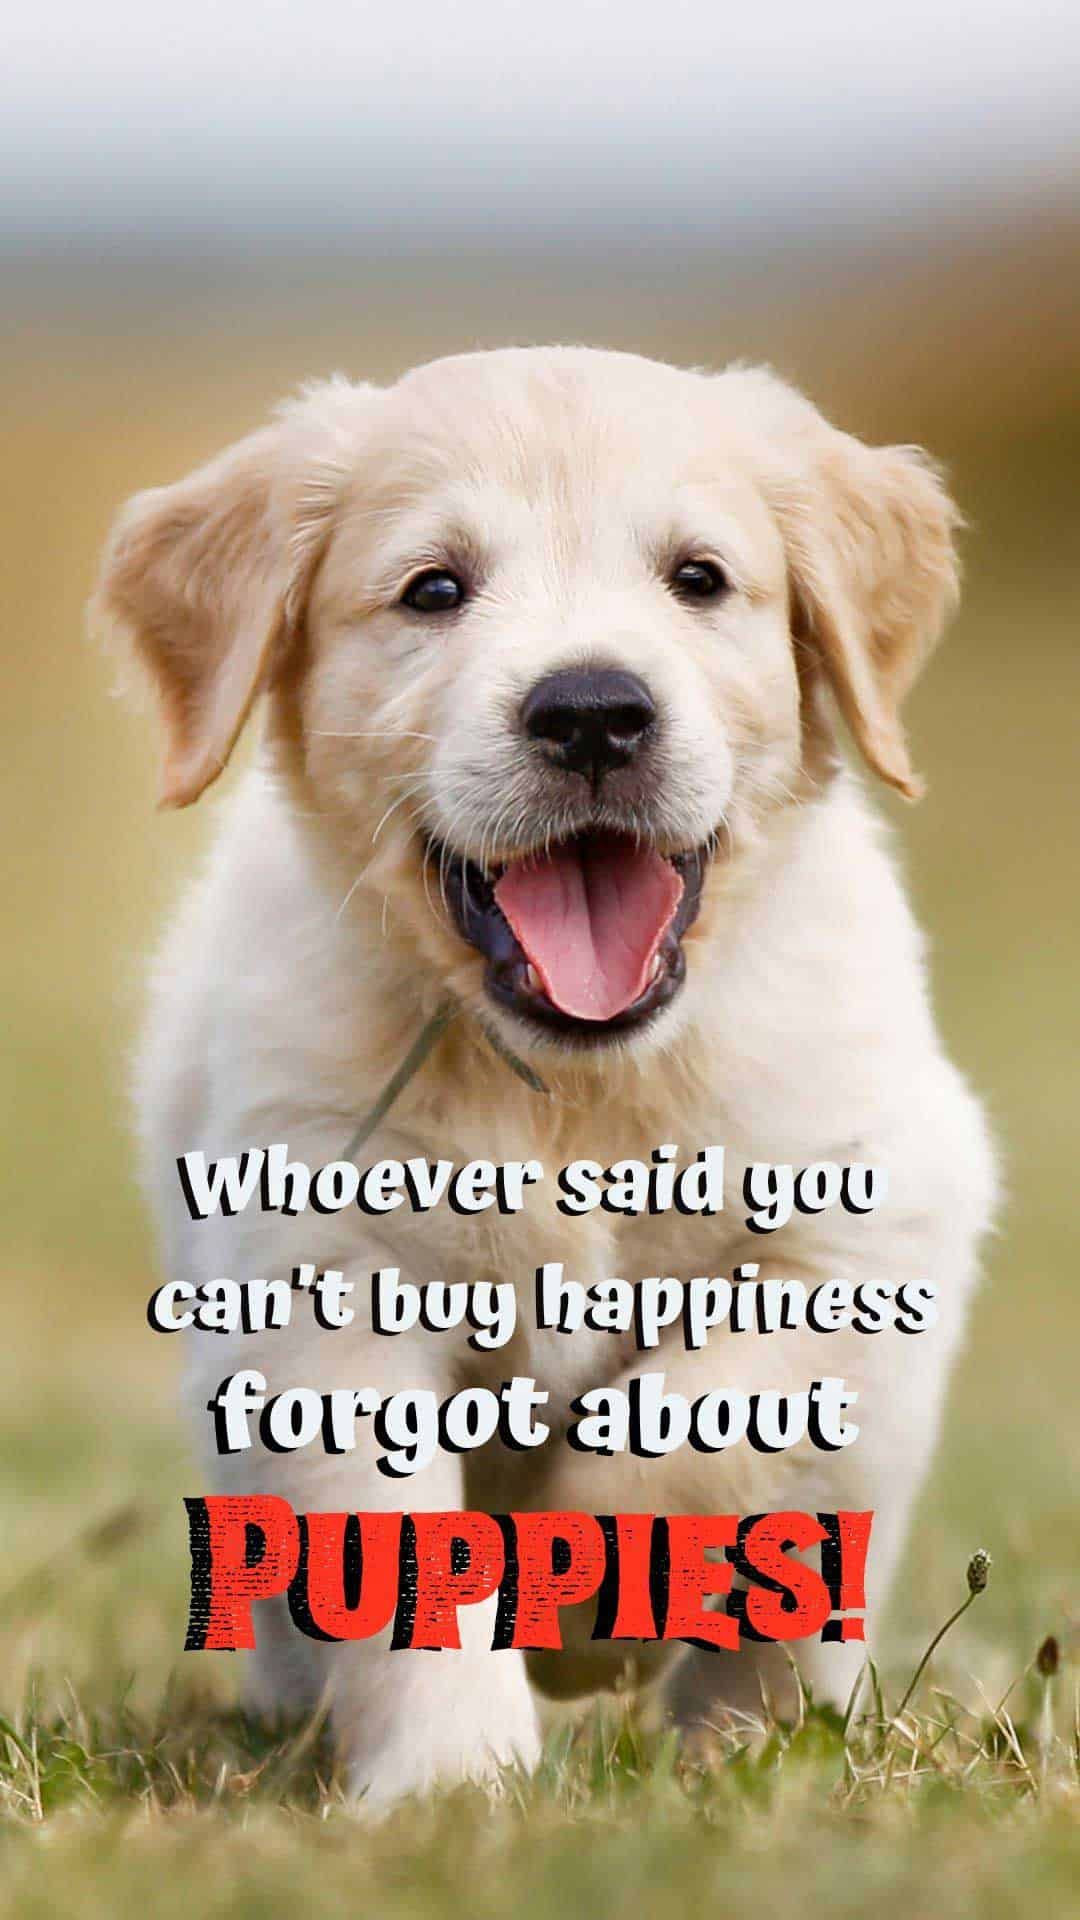 free dog wallpaper i phone and Android. 20 HD Sized homescreen wallpaper Dog Picture. Puppy quotes, Cute dog quotes, Puppy quotes funny